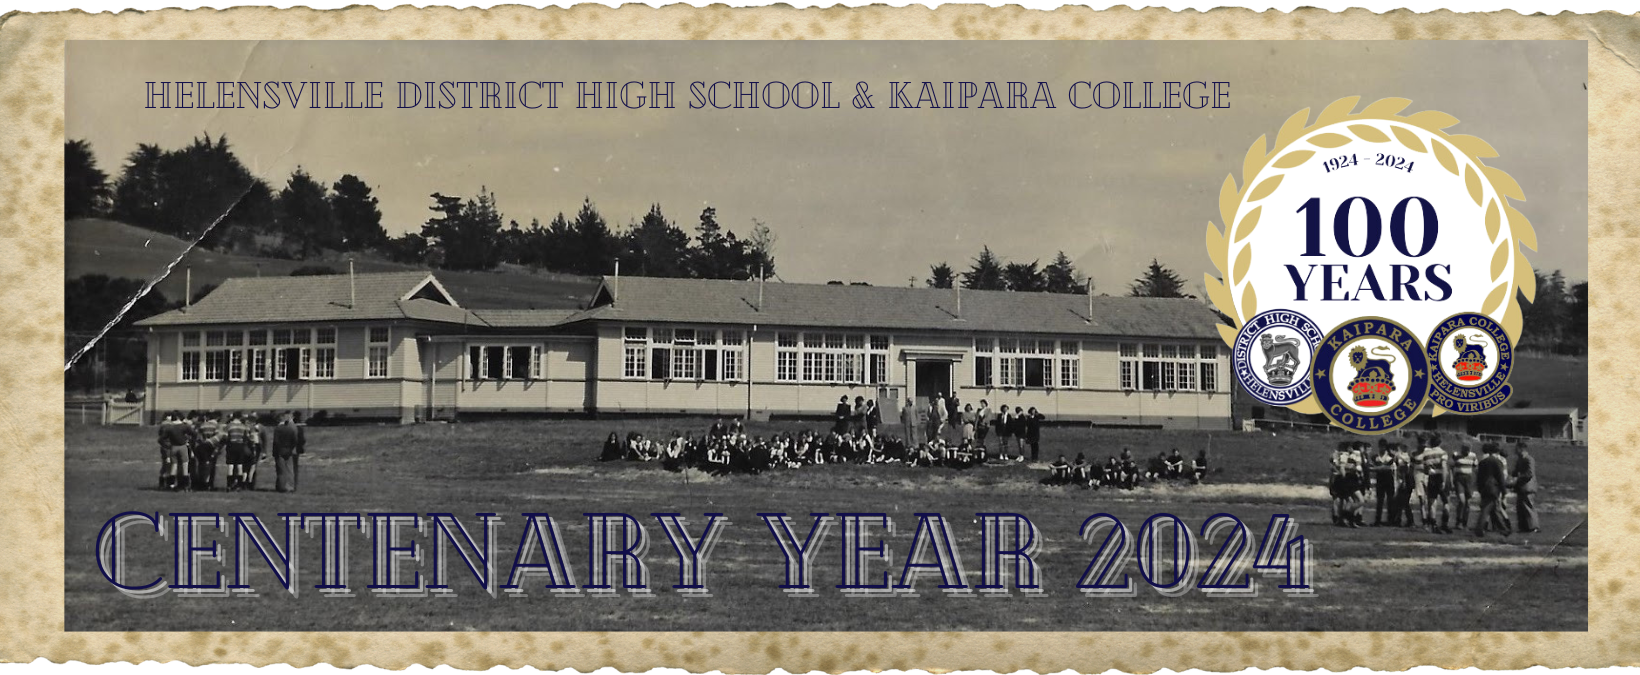 Centenary Year 2024 Facebook Banner (cropped)